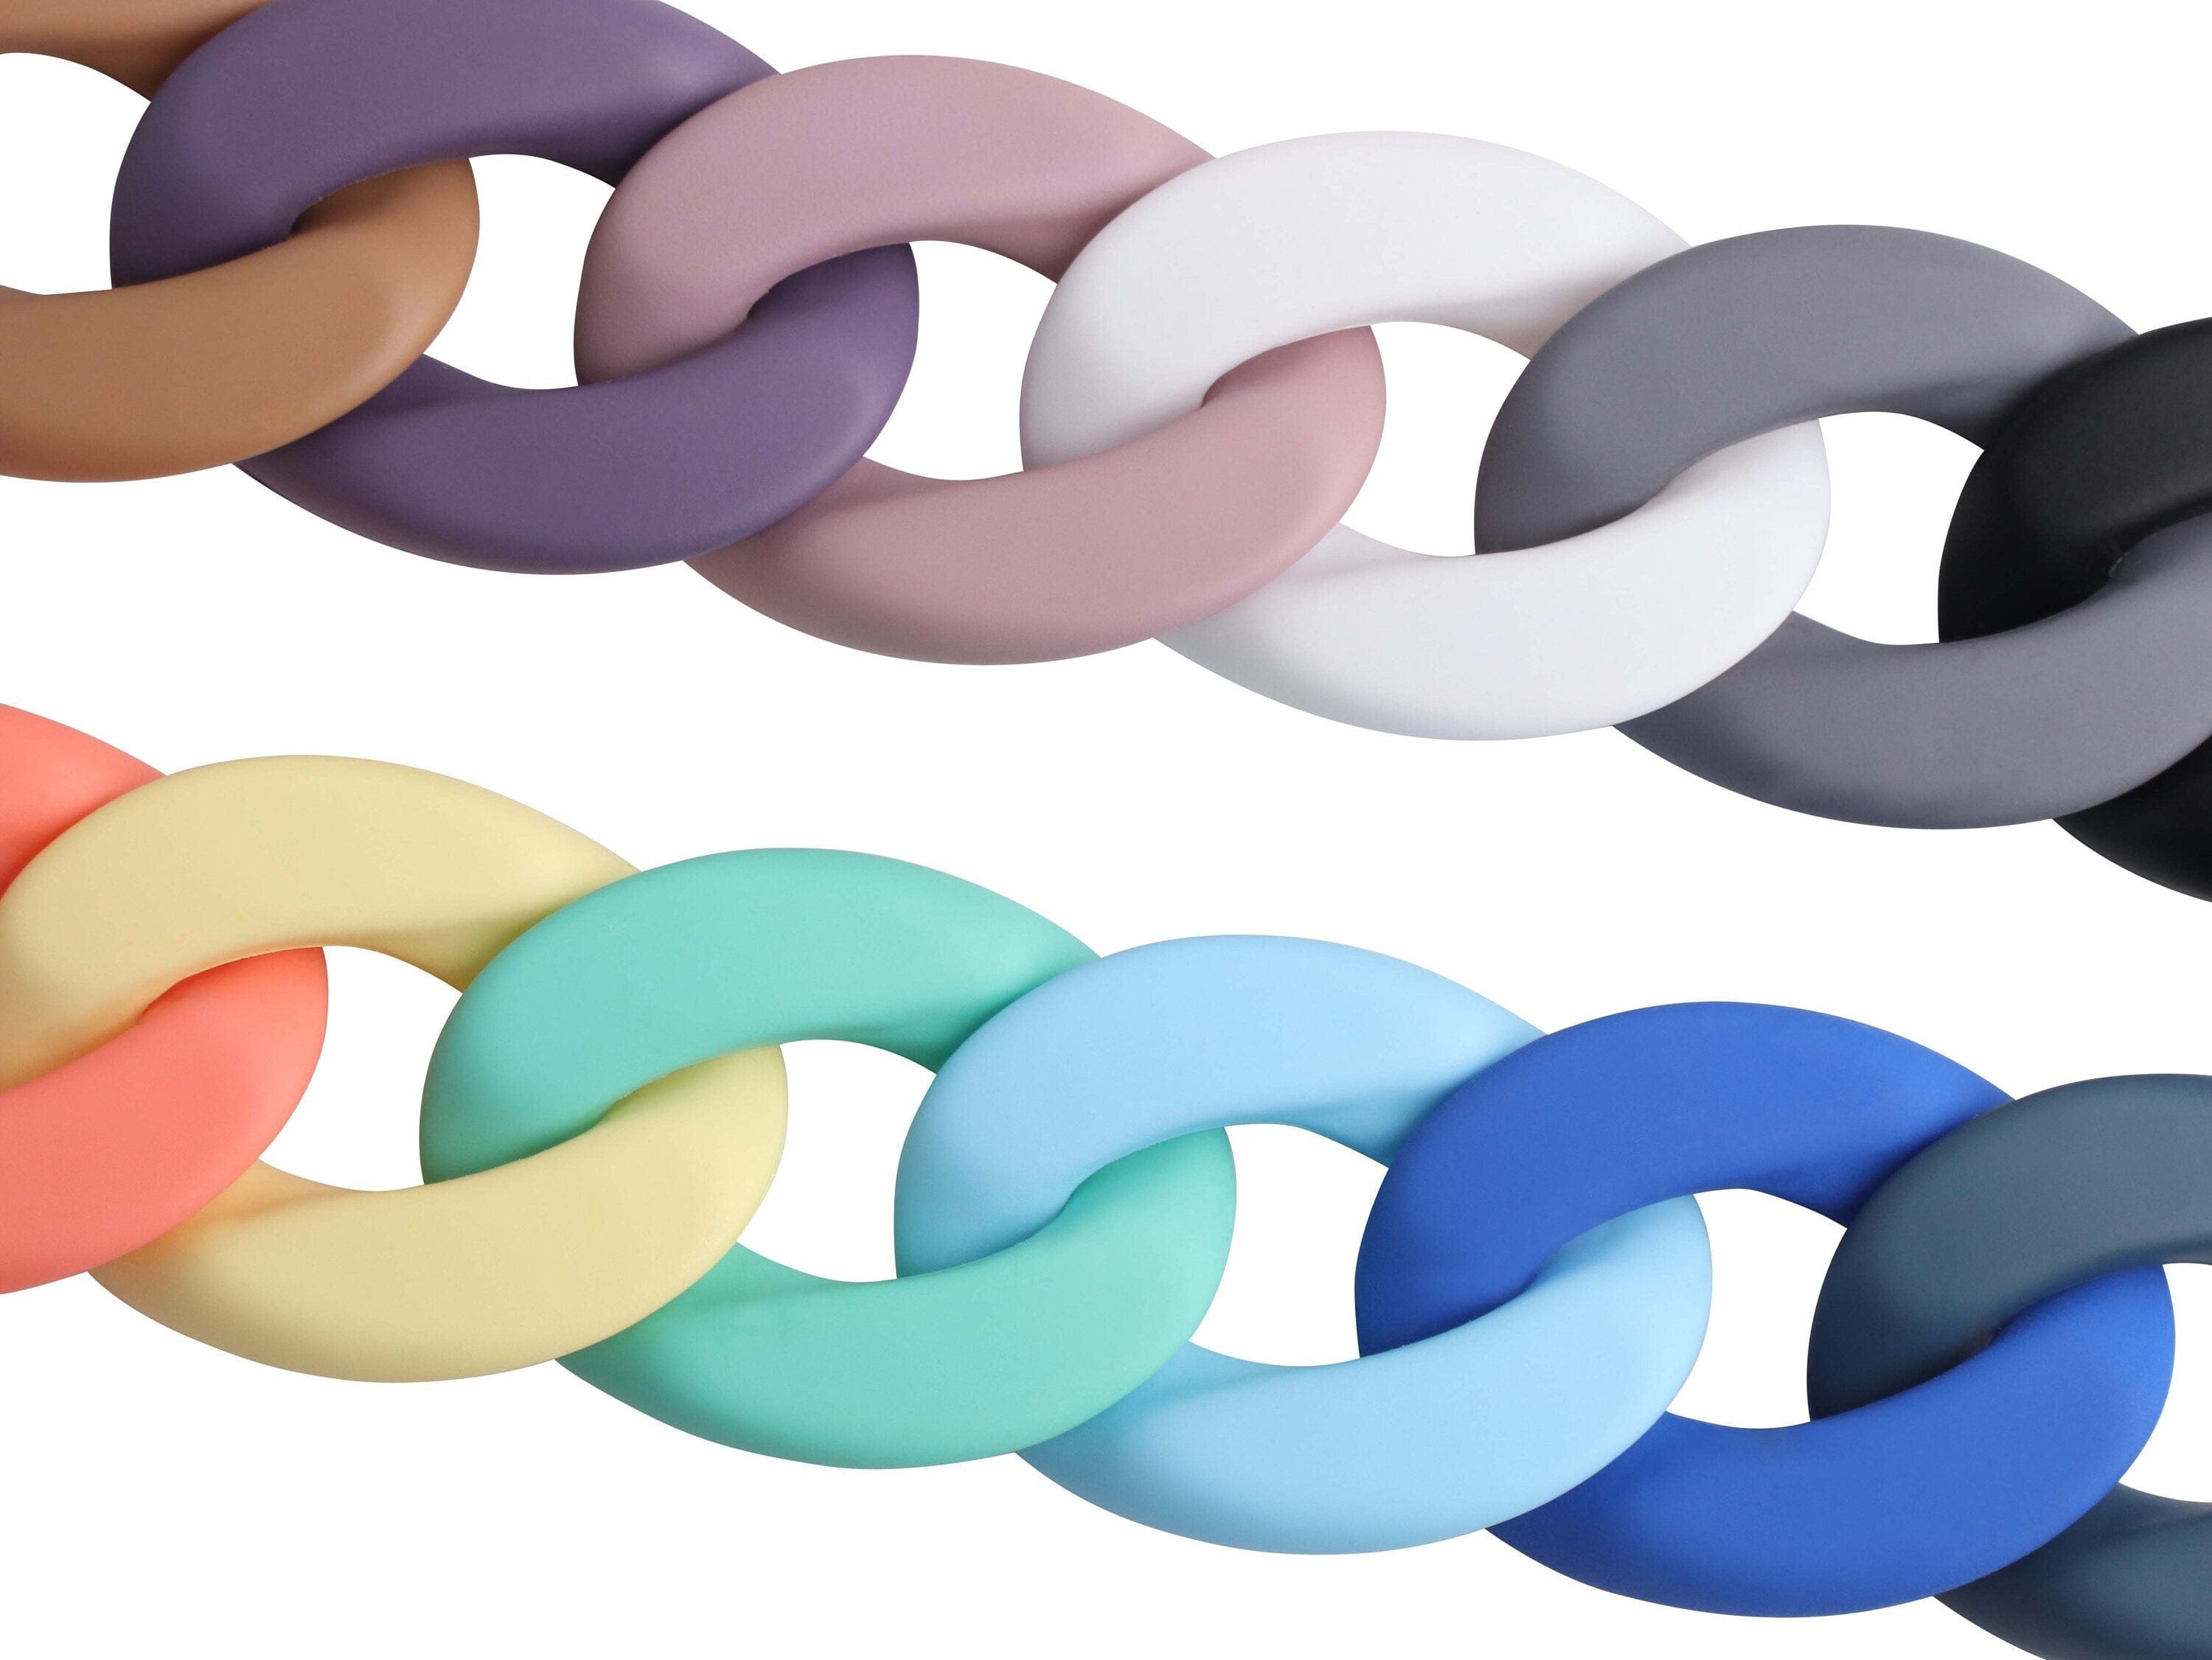 12 Packs: 400 ct. (4,800 total) Rainbow Plastic Chain Links by Creatology™